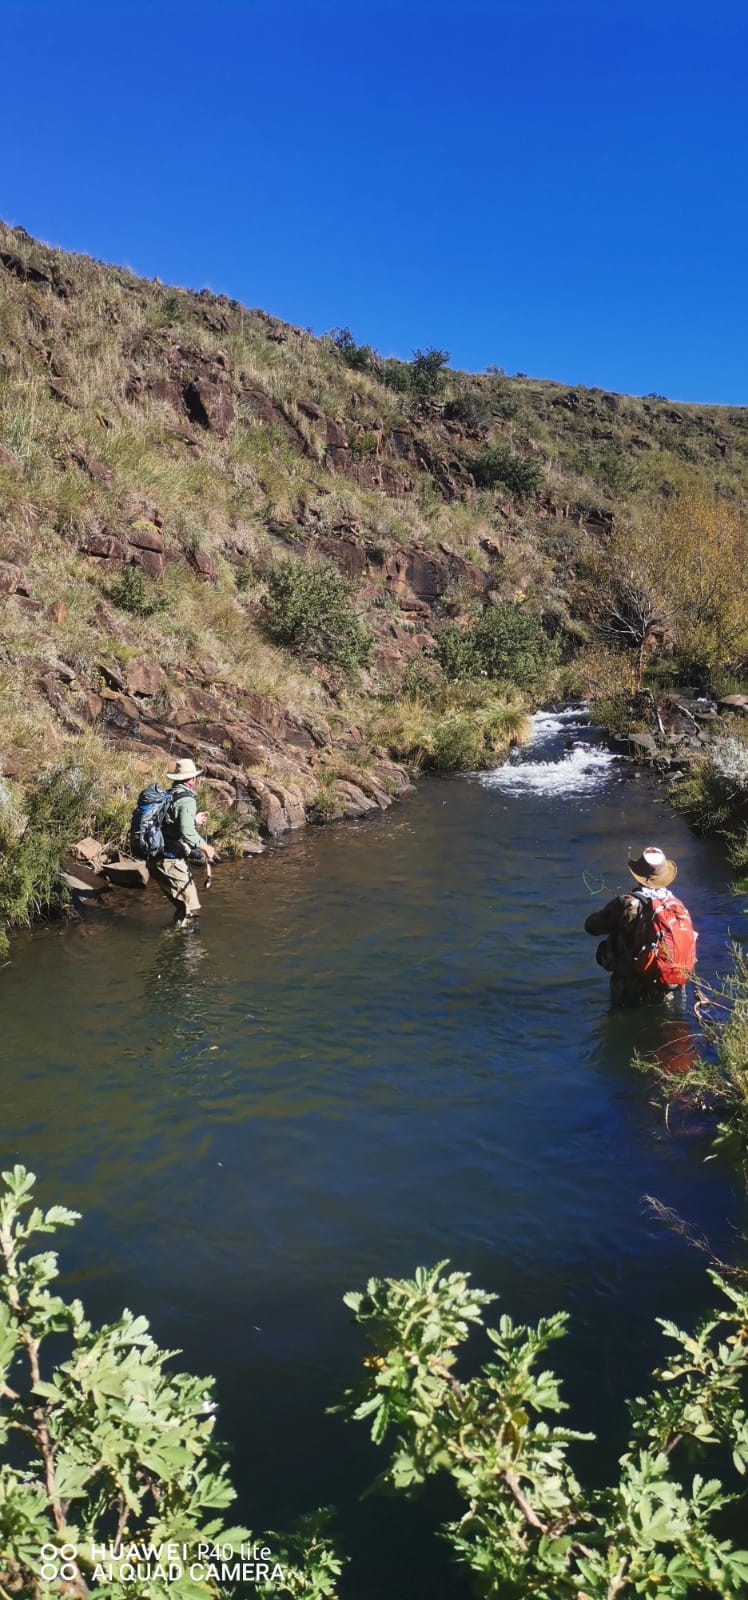 Vrederus Wild Trout - Fishing Destination in the Eastern Cape highlands